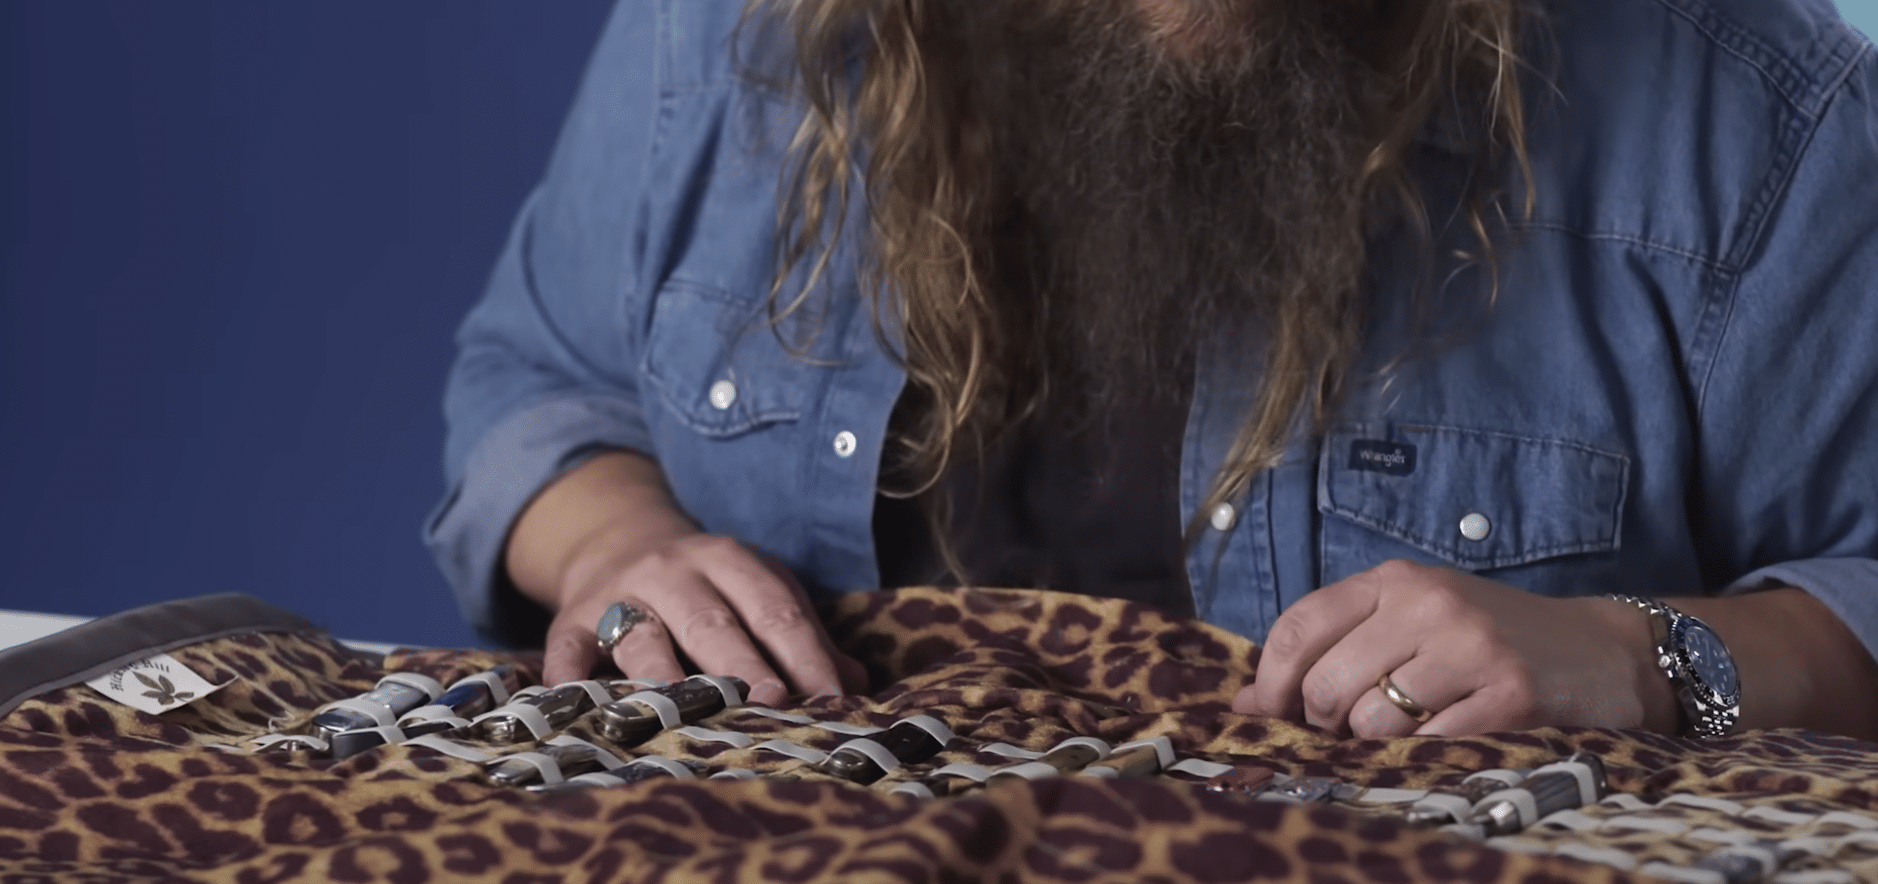 Chris Stapleton's late father's knife collection